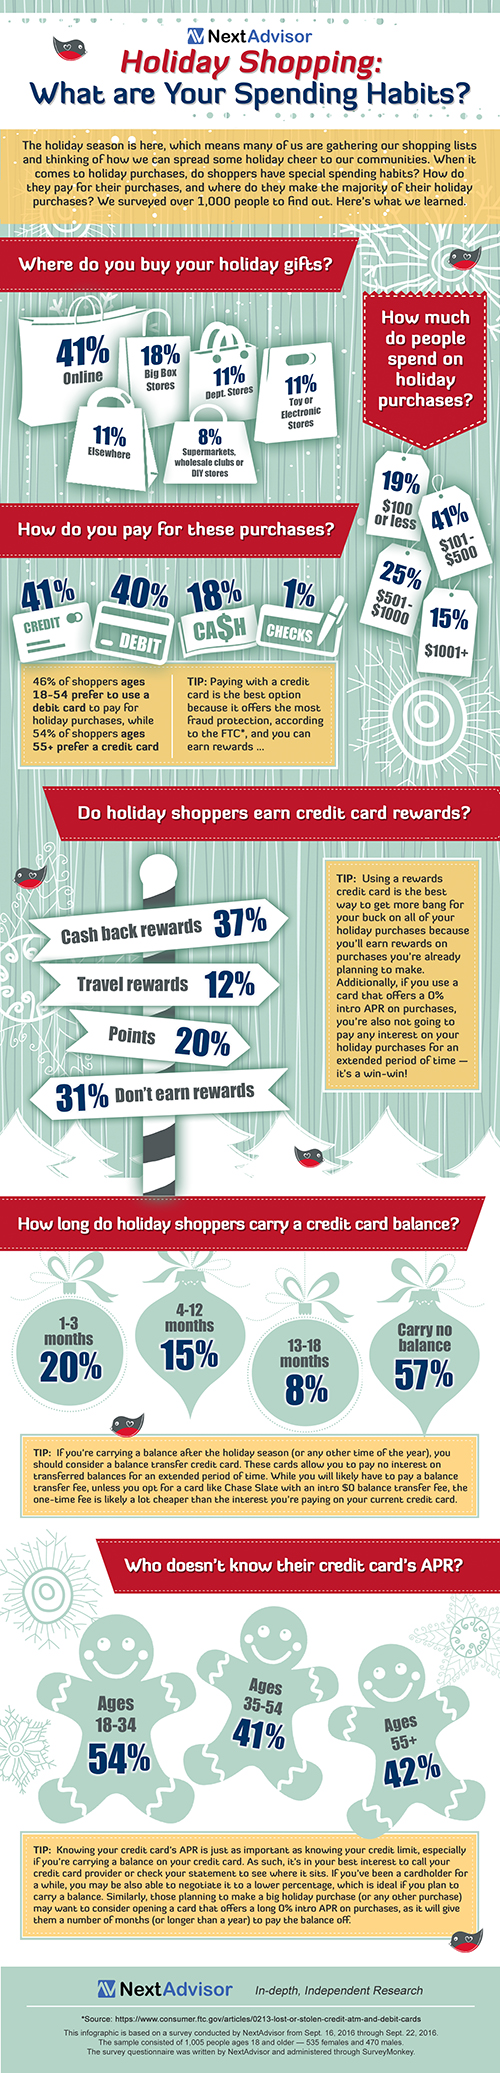 NextAdvisor releases infographic detailing consumers’ 2016 holiday shopping habits.